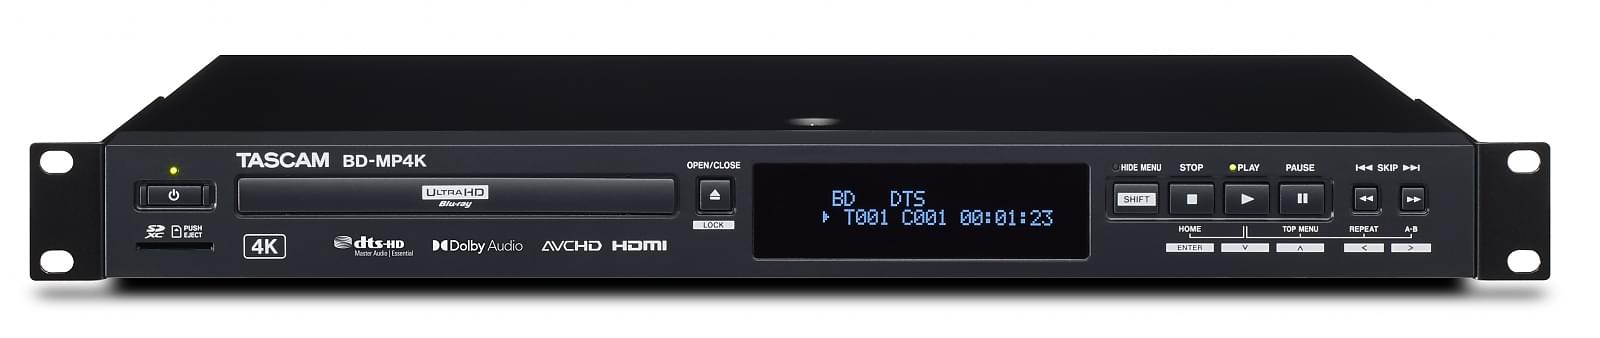 Professional 4K/UHD Blu-Ray/Multimedia Player for Touring and Installation | Tascam BD-MP4K